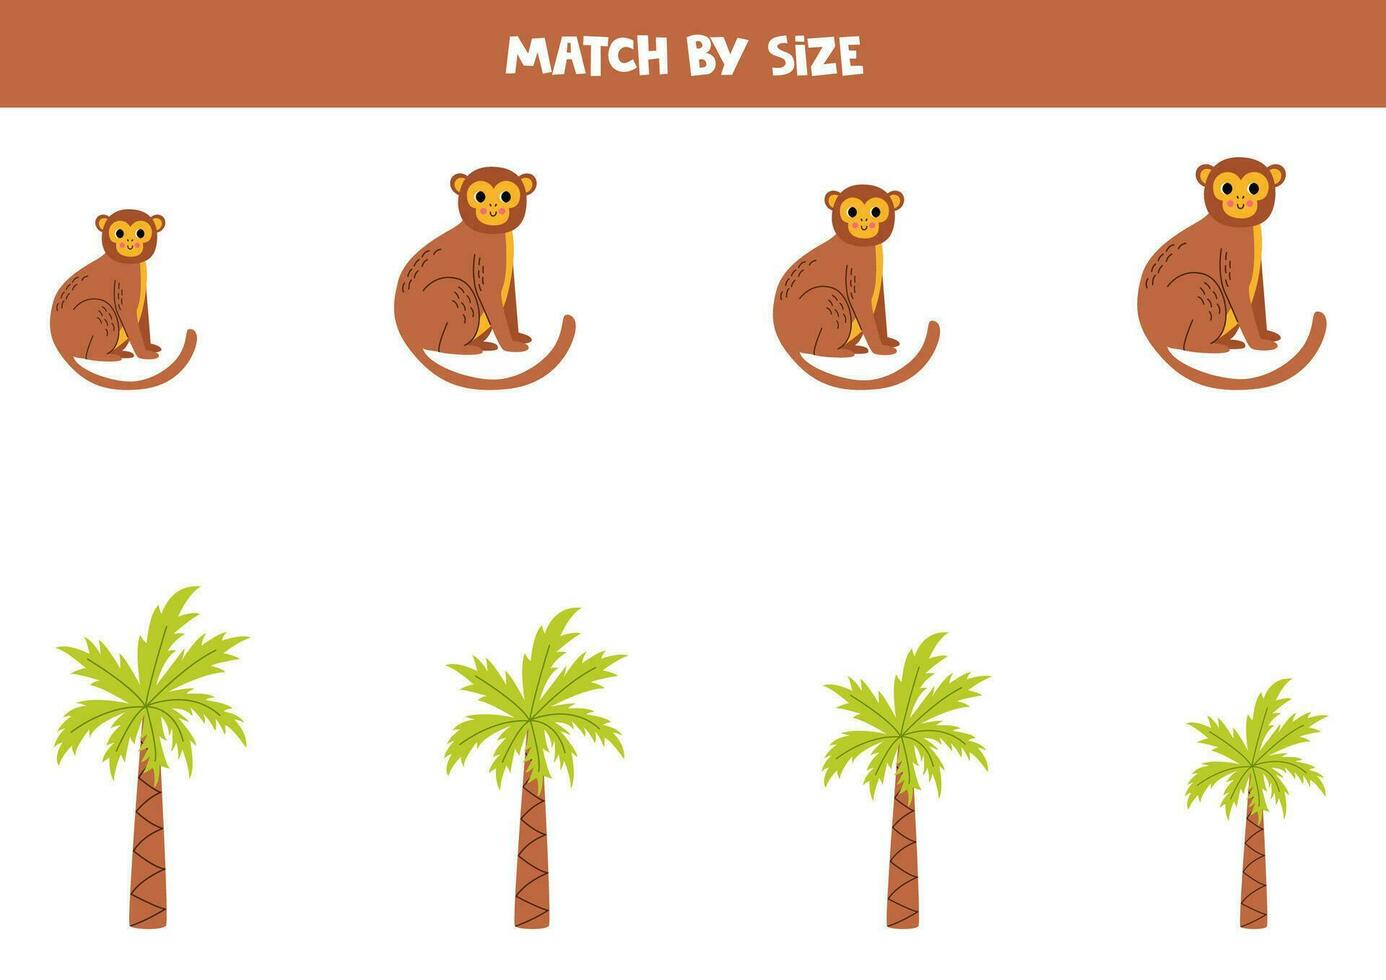 Matching game for preschool kids. Match cute monkeys and palm trees by size. vector